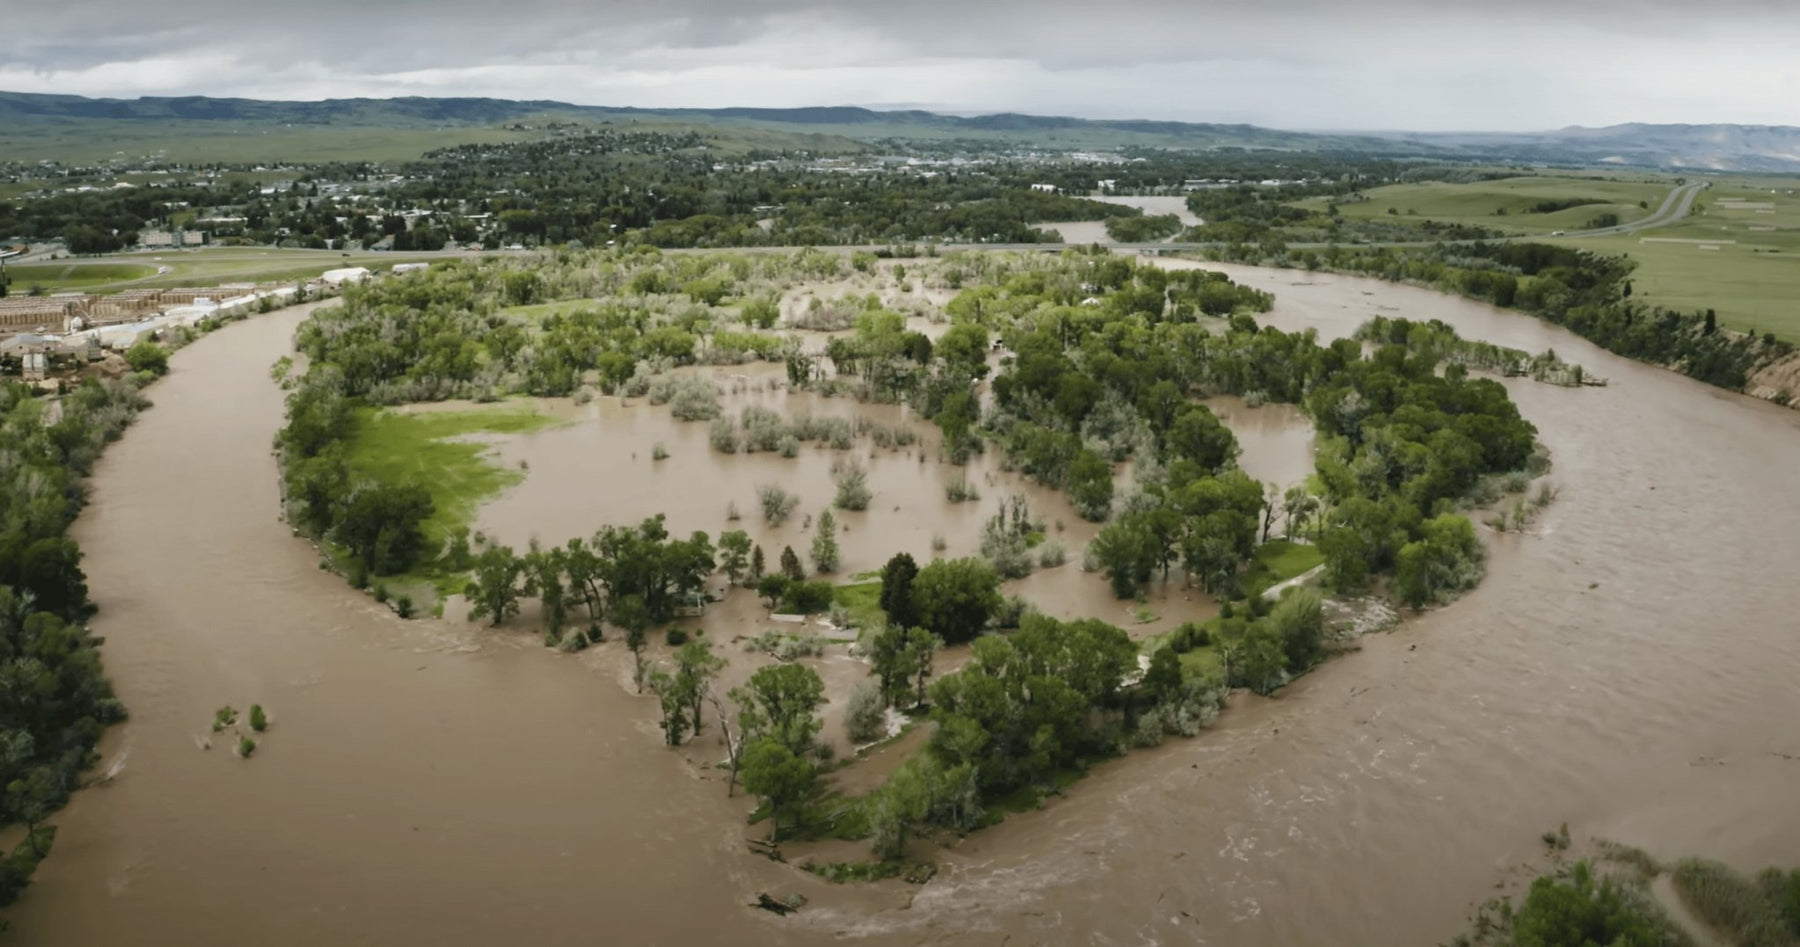 HISTORIC FLOODS Have Devastated Communities Along The Yellowstone River - FishAndSave